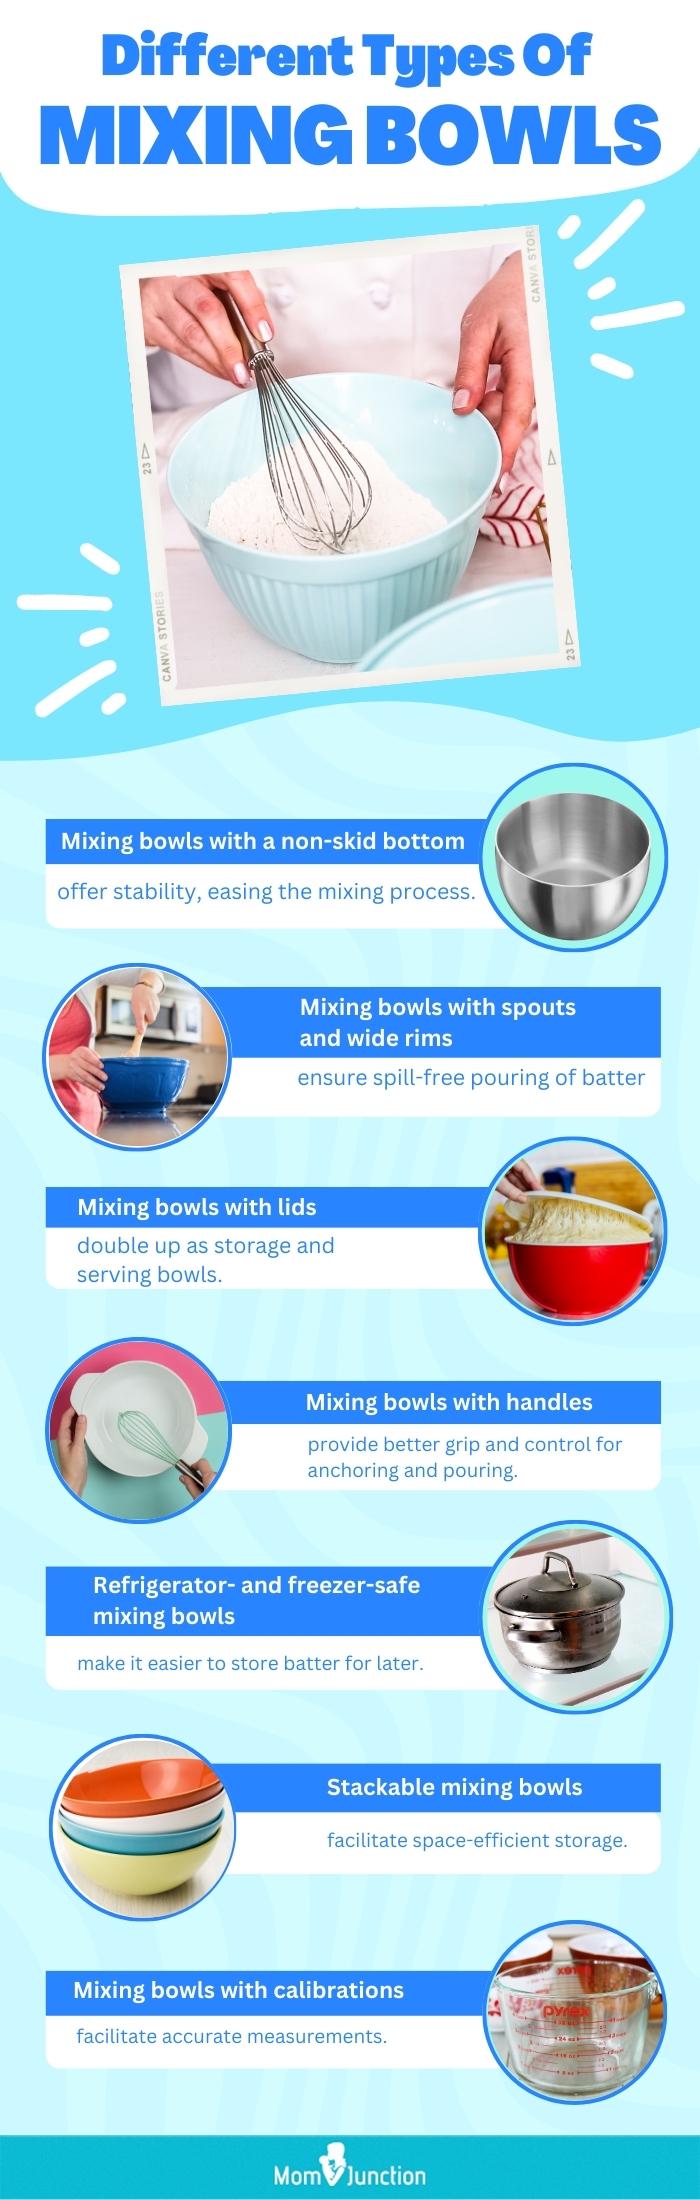 Different Types Of Mixing Bowls (infographic)